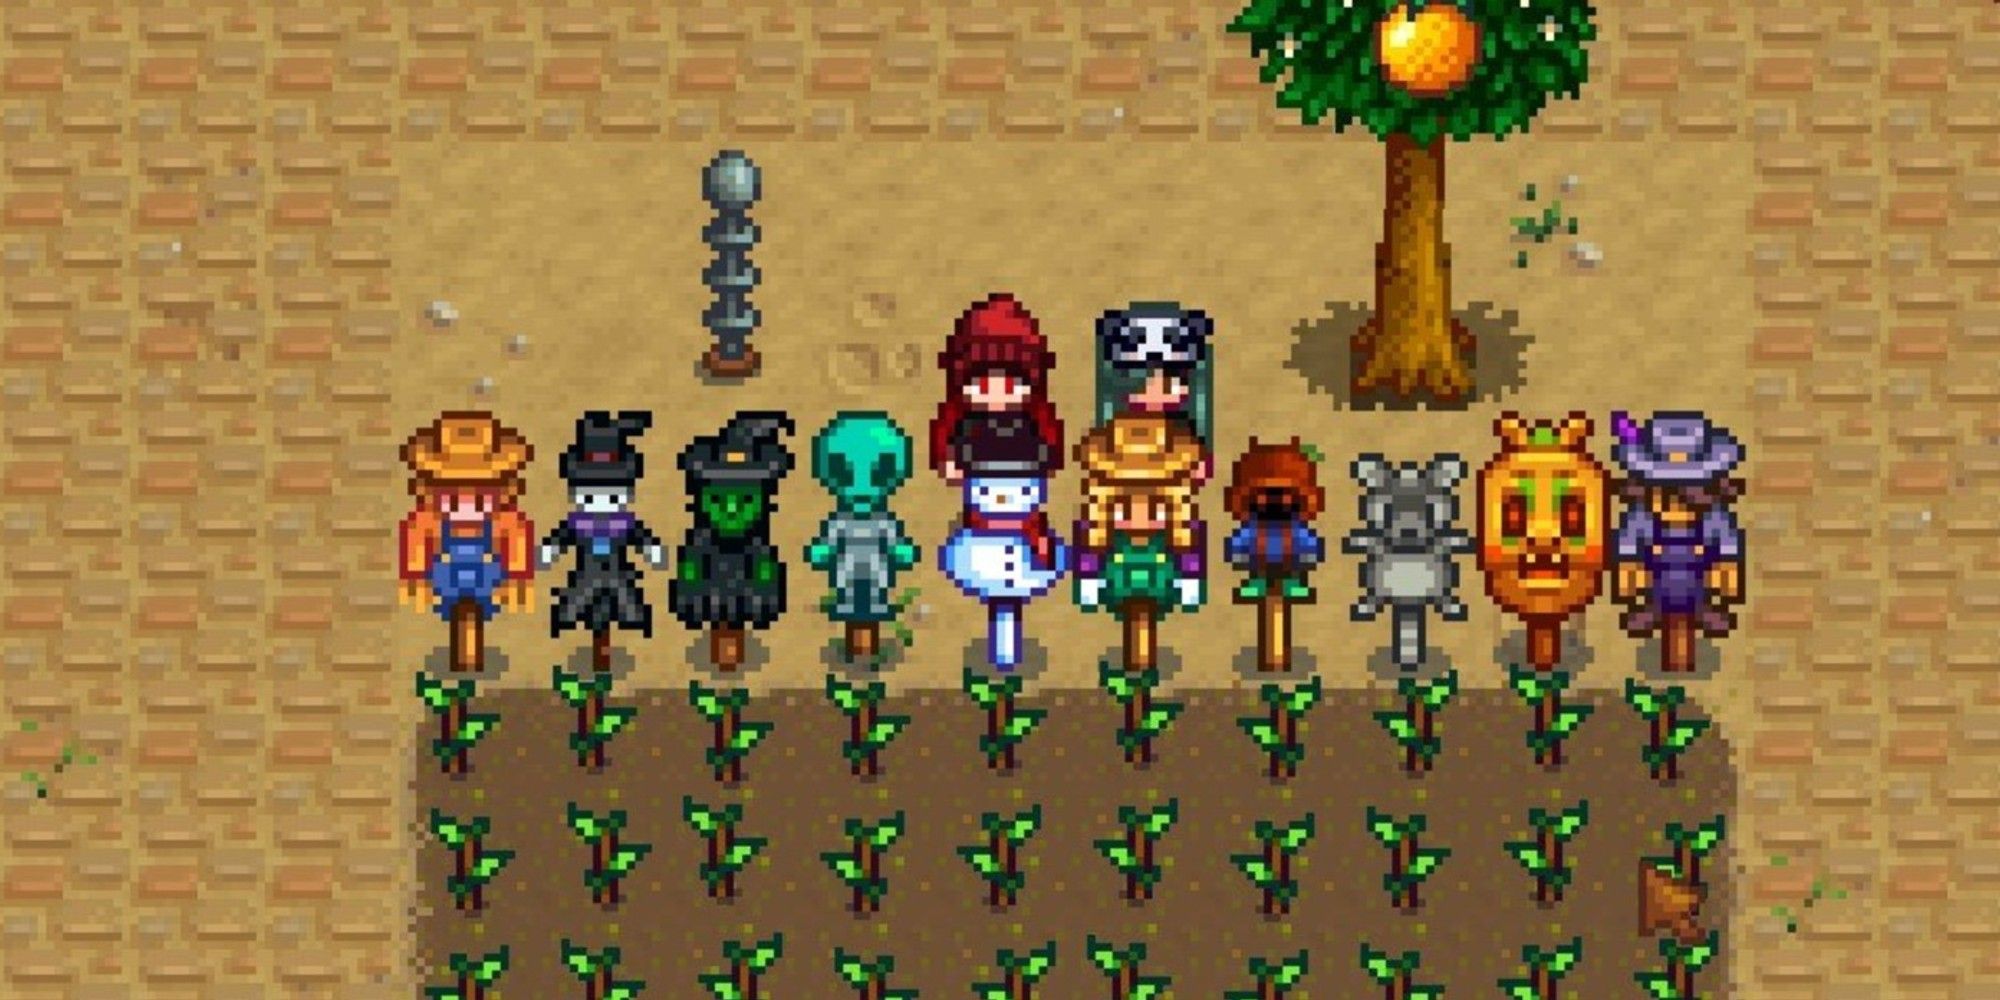 players standing next to all 10 possible scarecrows in the game